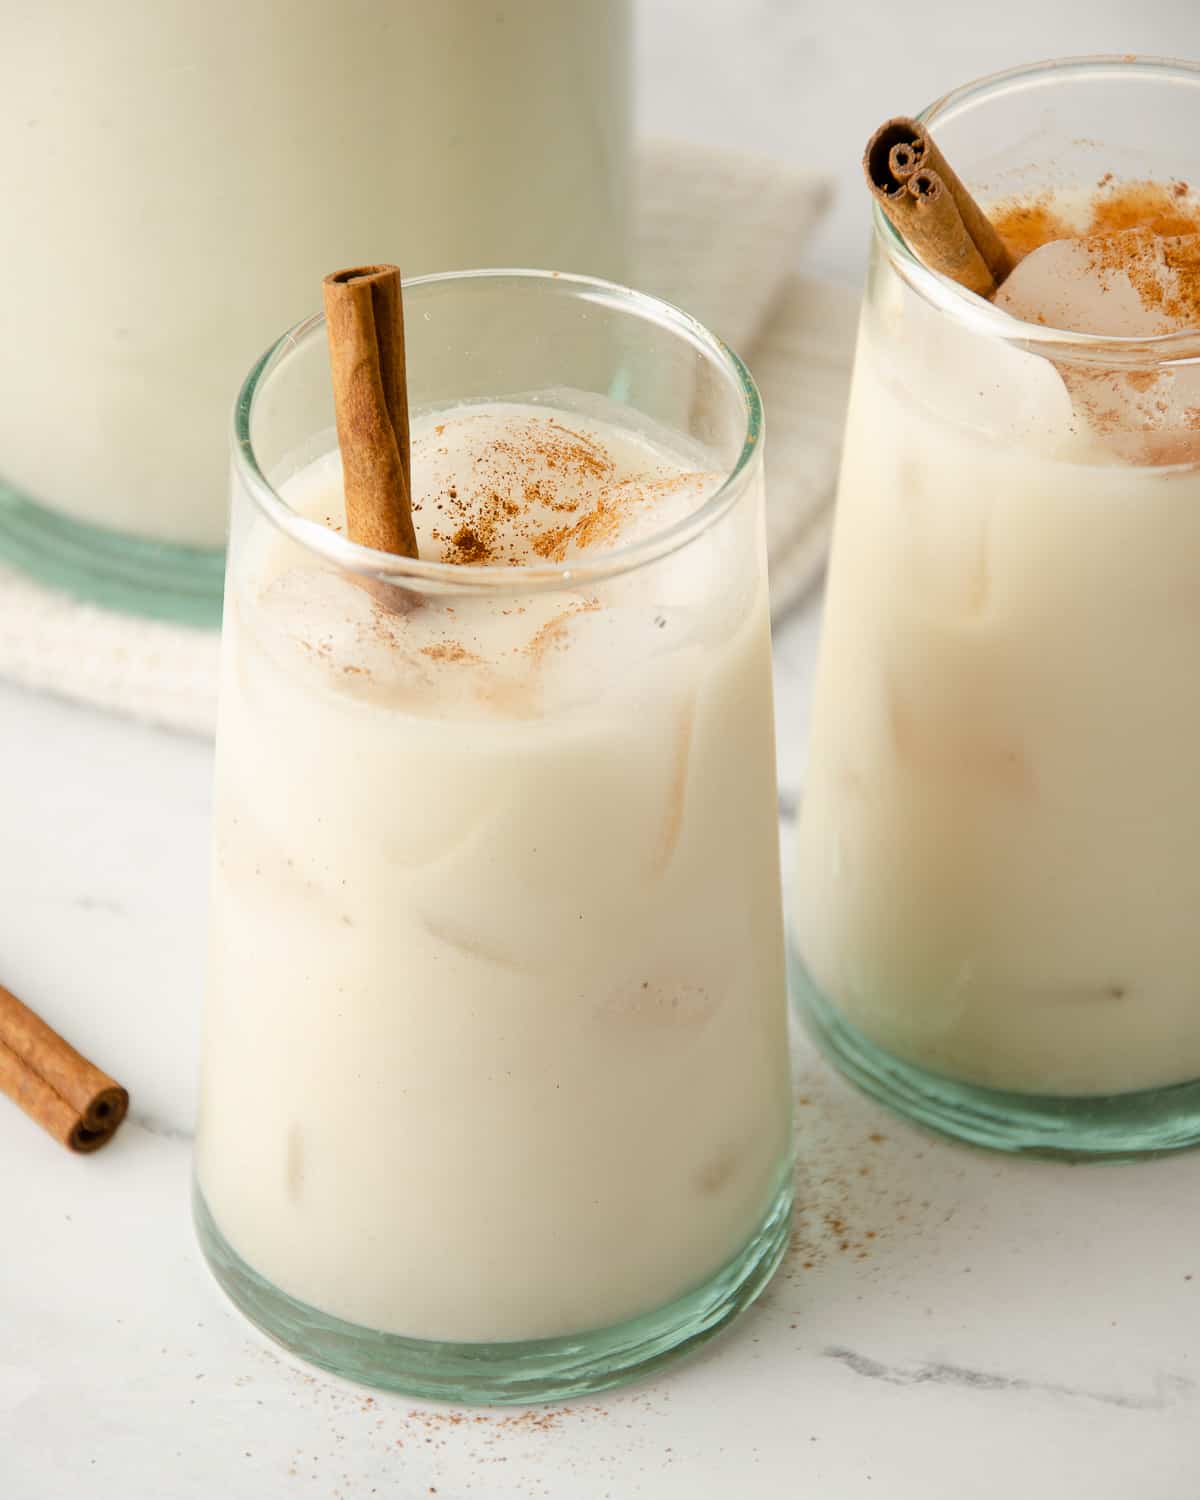 Two glassed of horchata with a cinnamon stick topped with ground cinnamon.